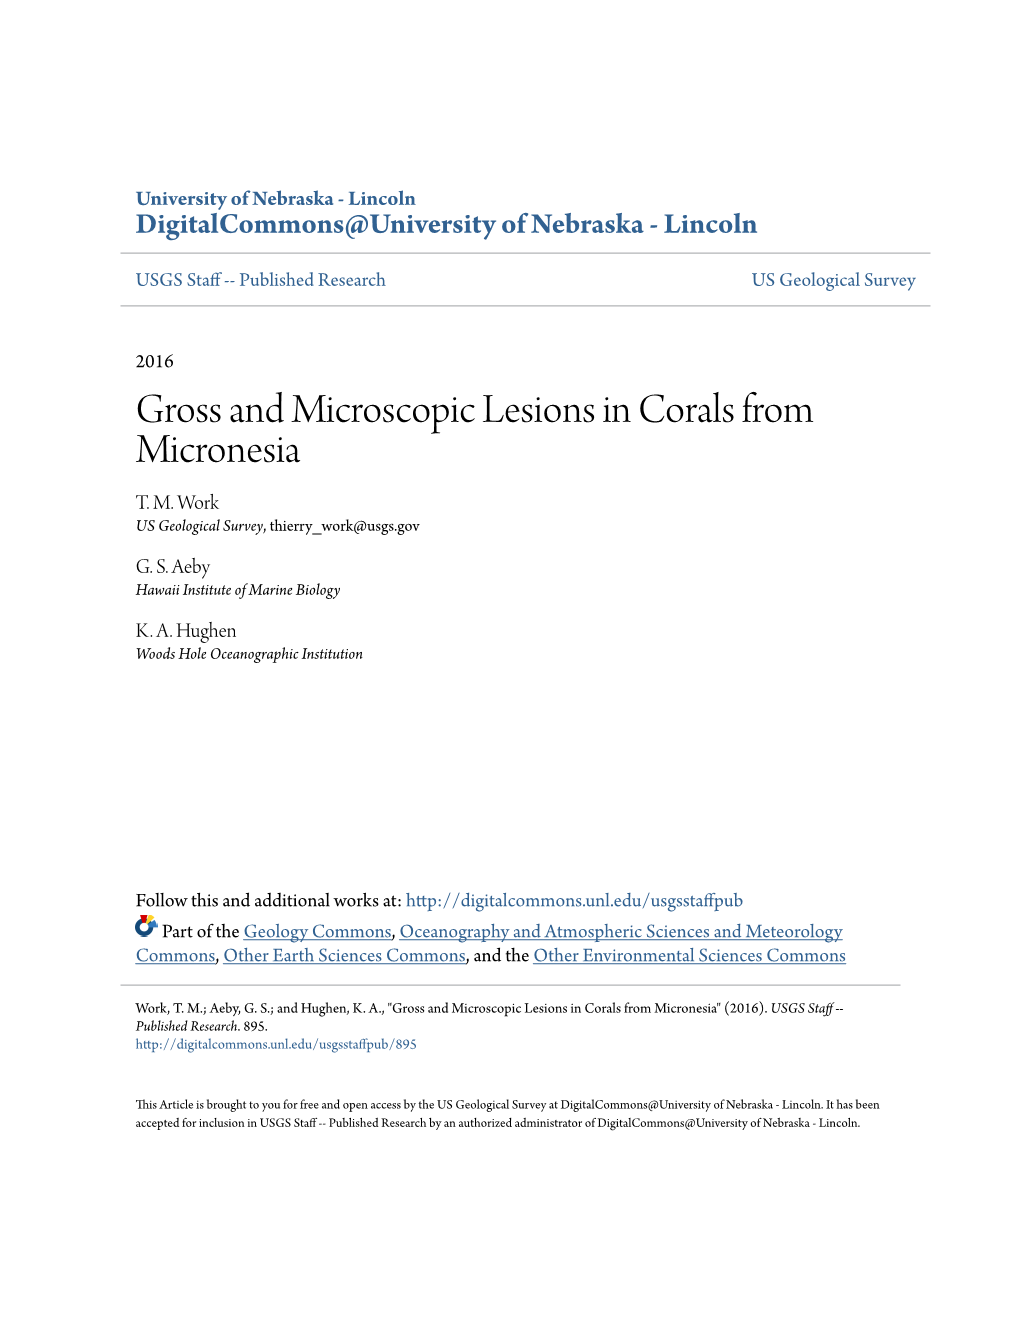 Gross and Microscopic Lesions in Corals from Micronesia T